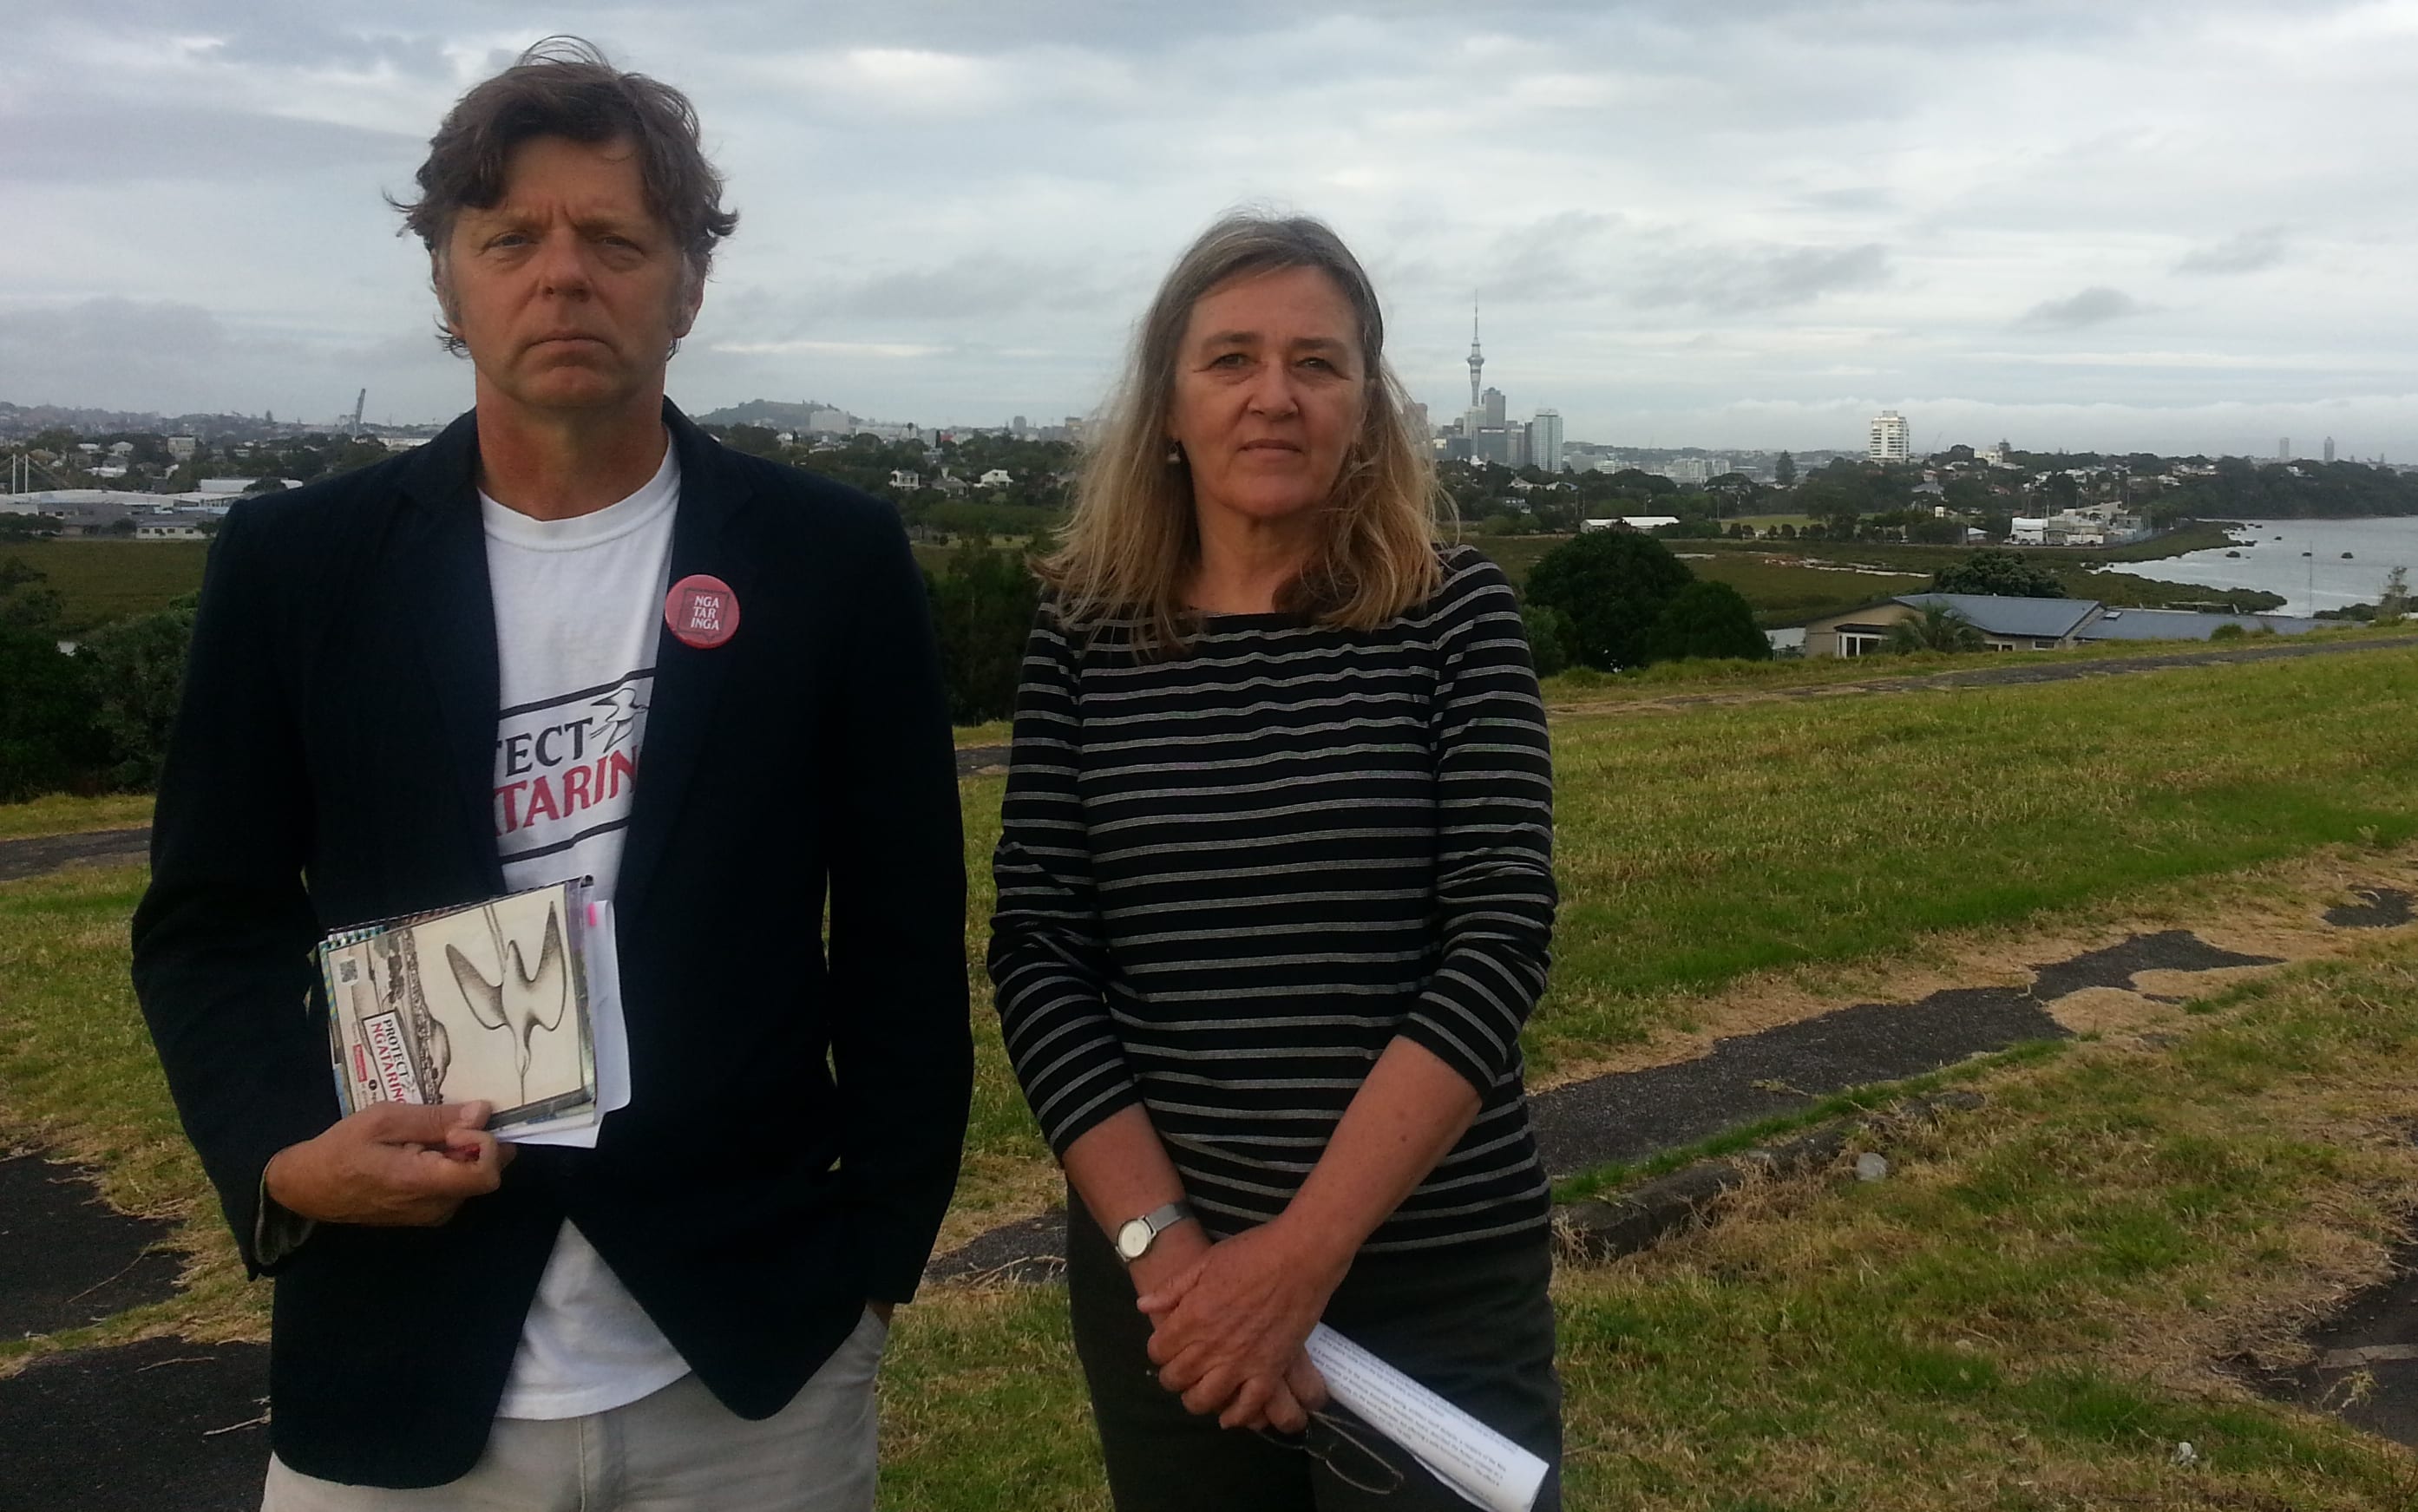 Iain Rea and Trish Deans are part of a Devonport residents' group appealing the consent for a 600-bed retirement complex to be built in the Auckland suburb.